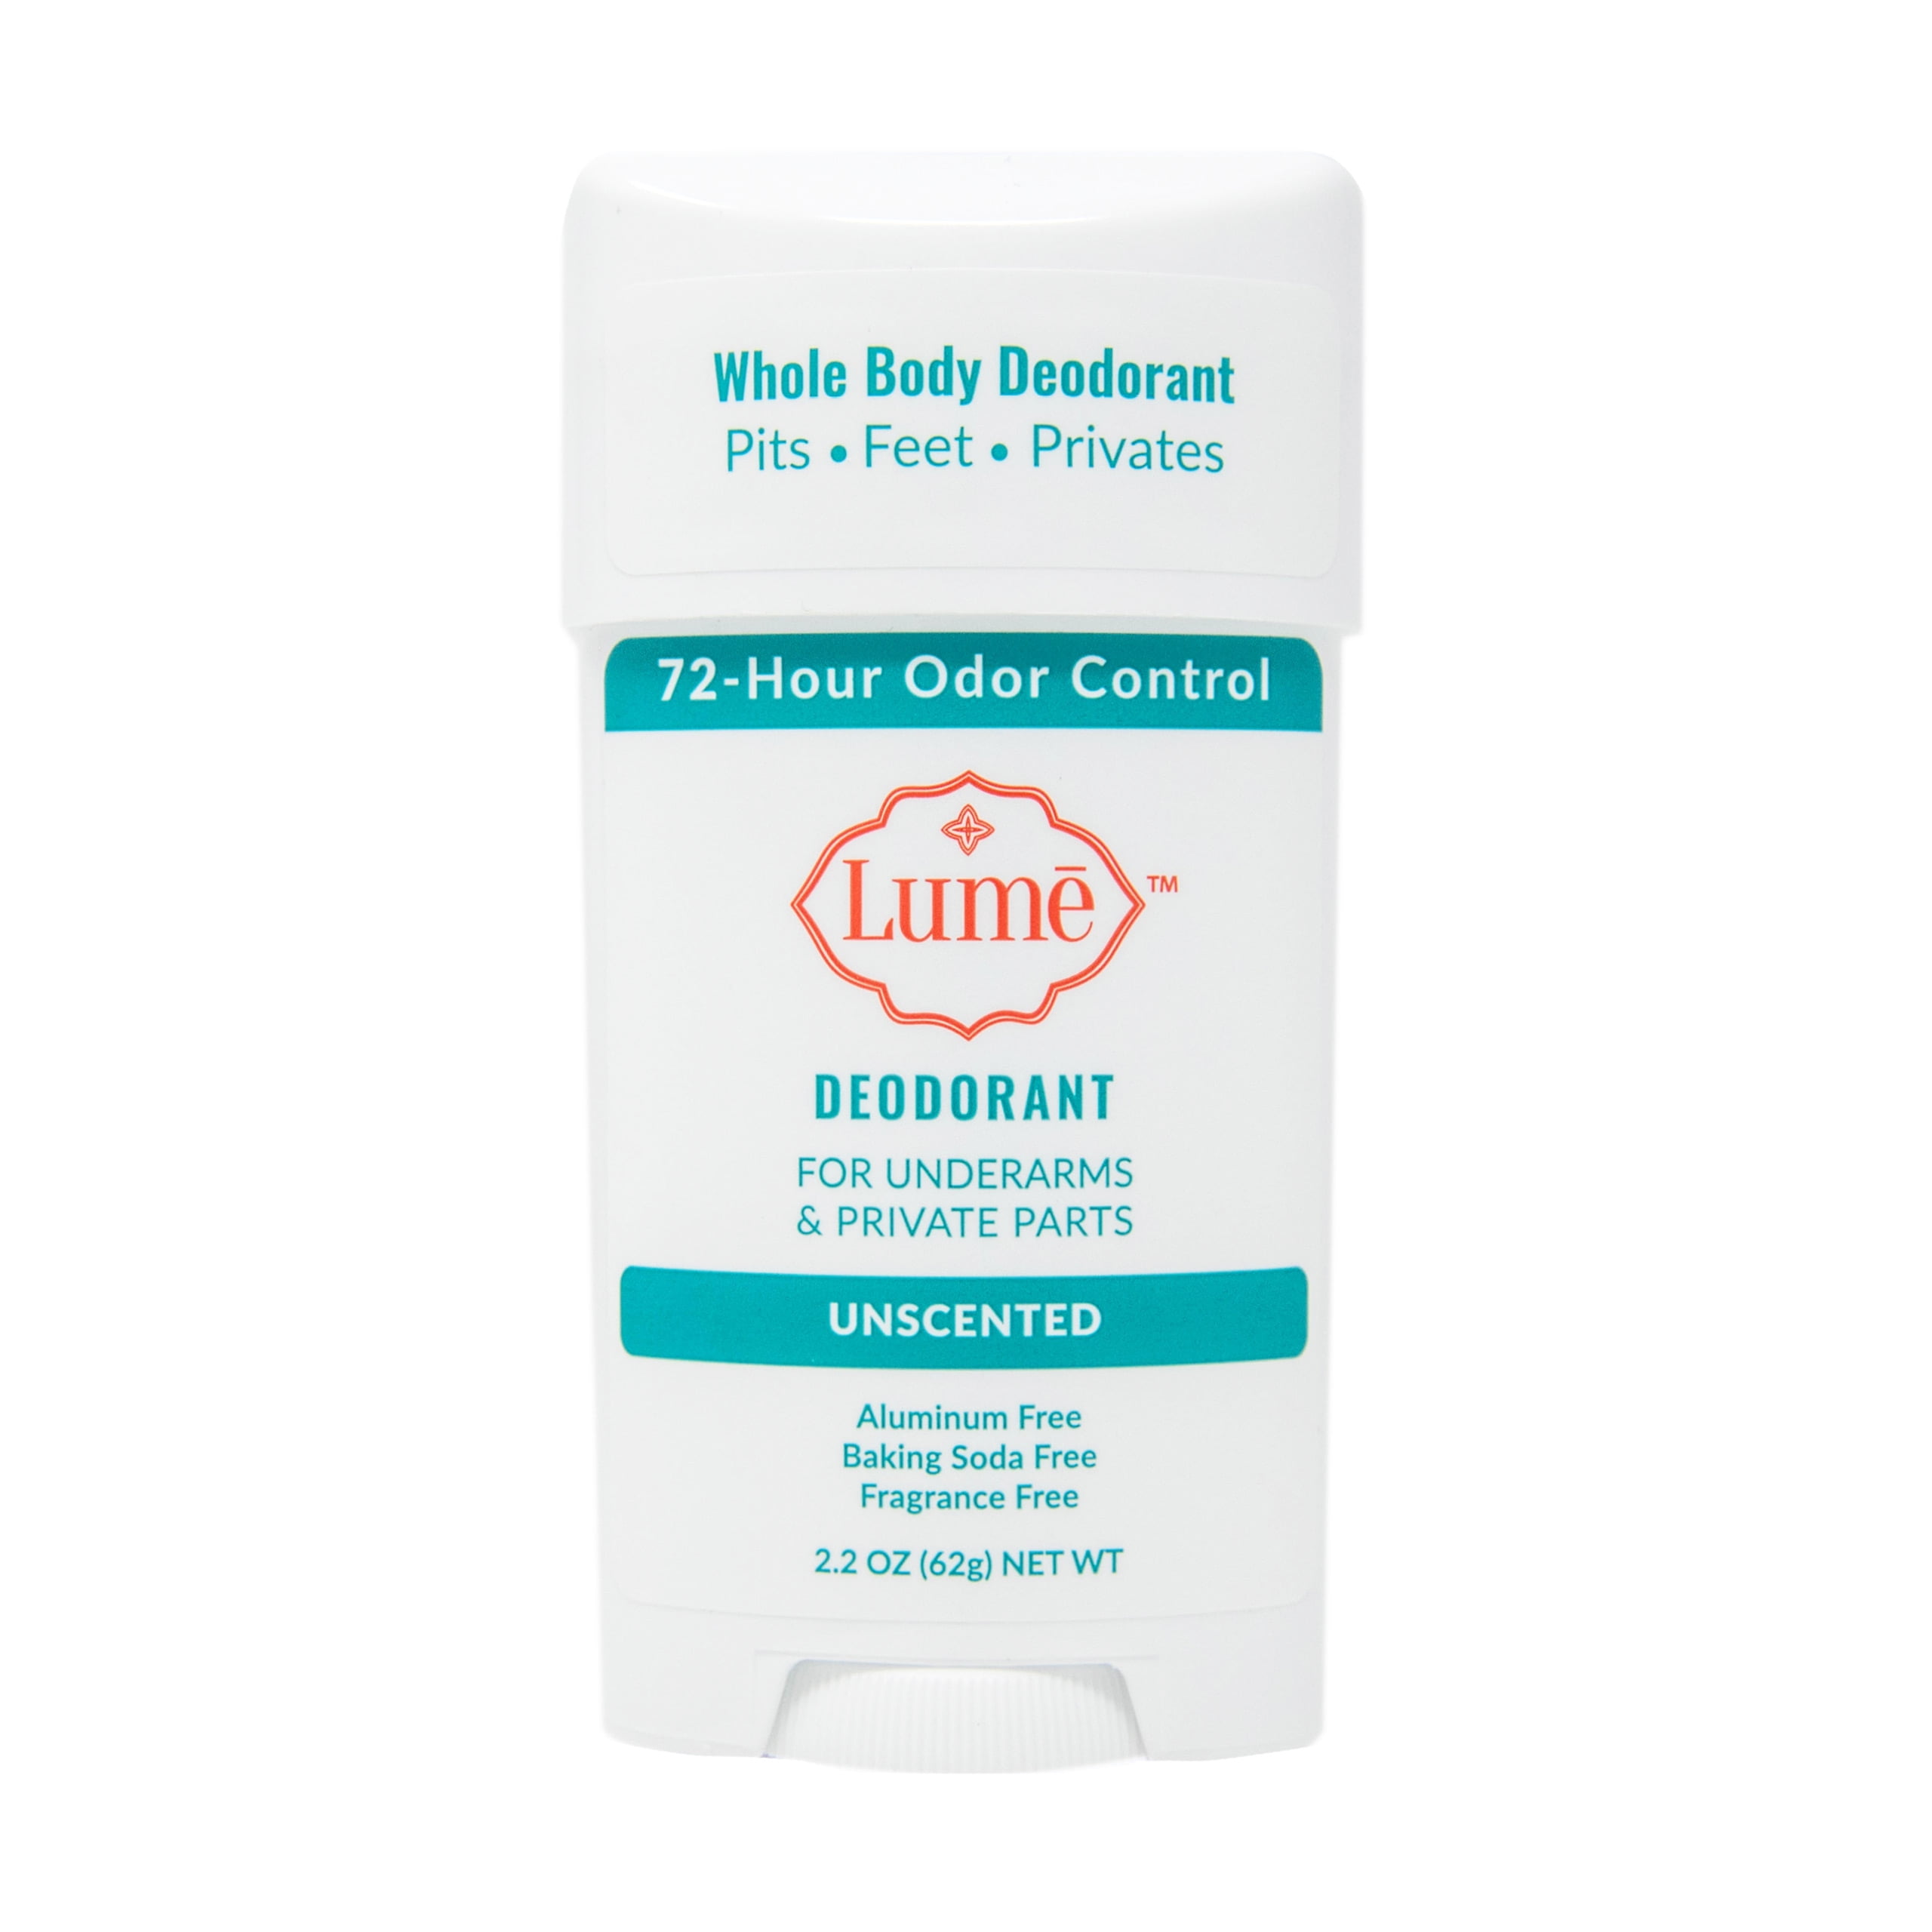 Lume Deodorant - Underarms and Private Parts - Aluminum-Free, Baking Soda-Free, Hypoallergenic, and Safe For Sensitive Skin - 2.2 Ounce Stick Walmart.com